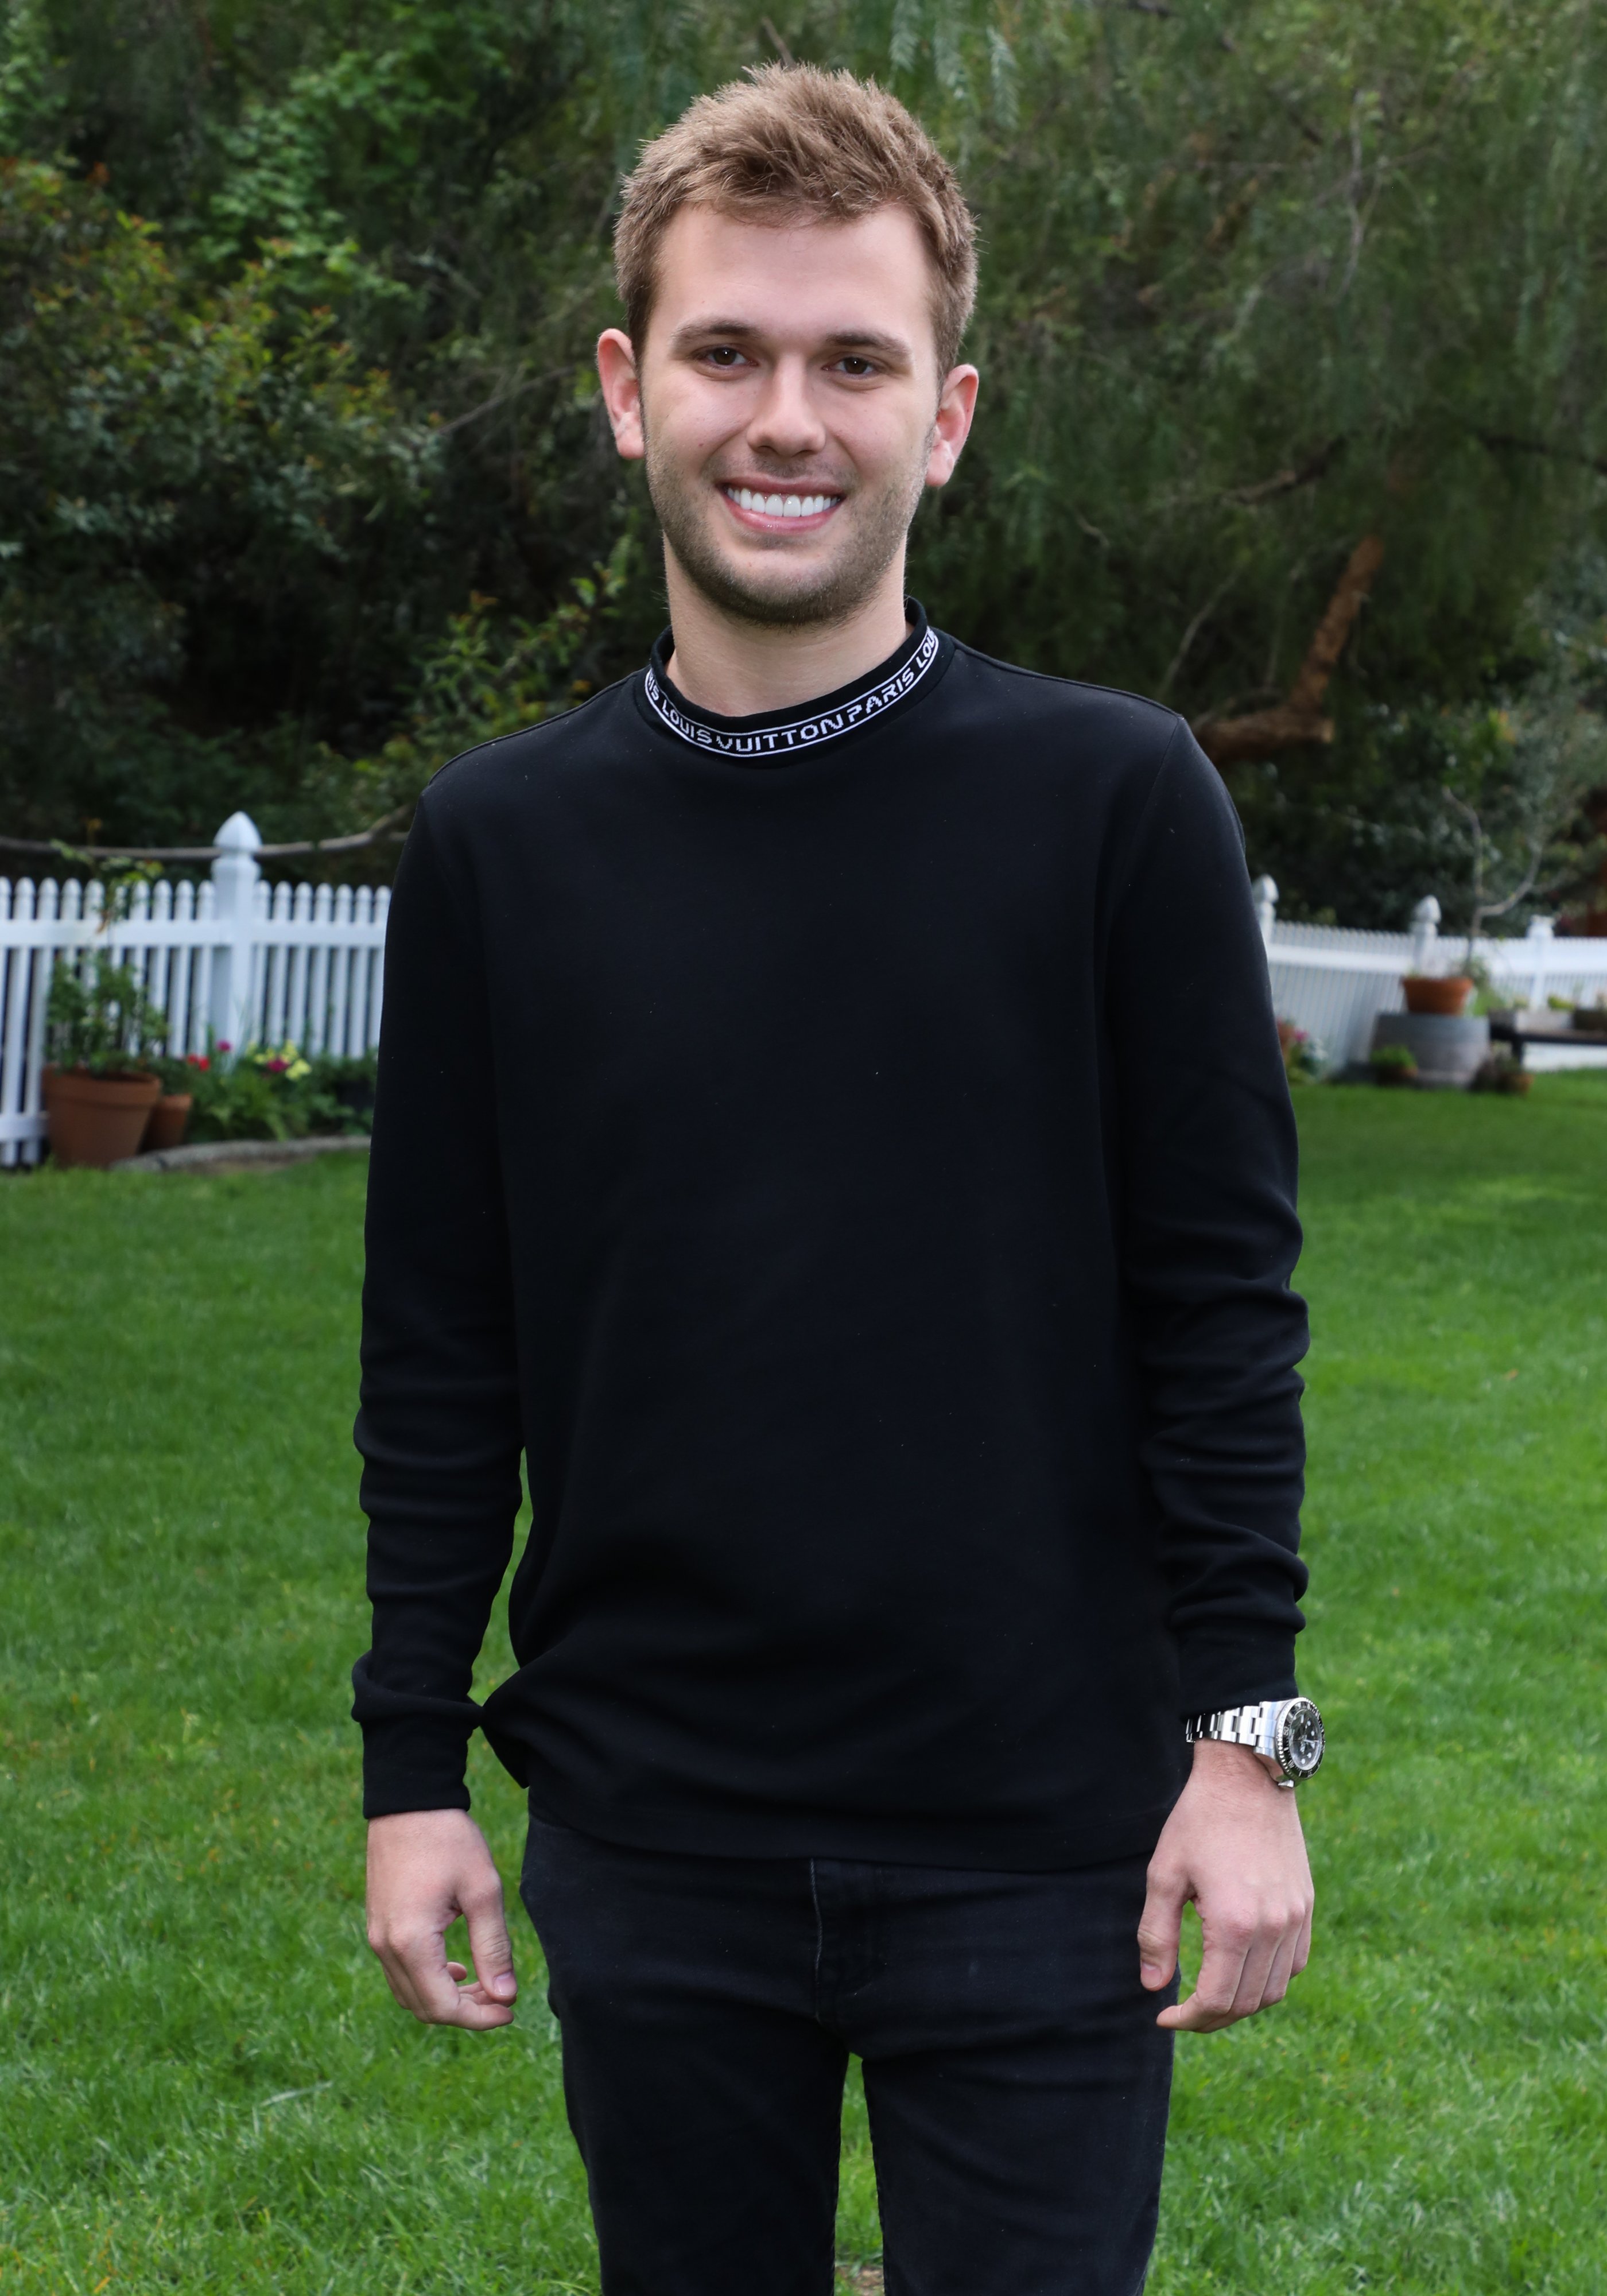 Chase Chrisley visits "Home & Family" at Universal Studios in Universal City, California on March 27, 2019 | Photo: Getty Images